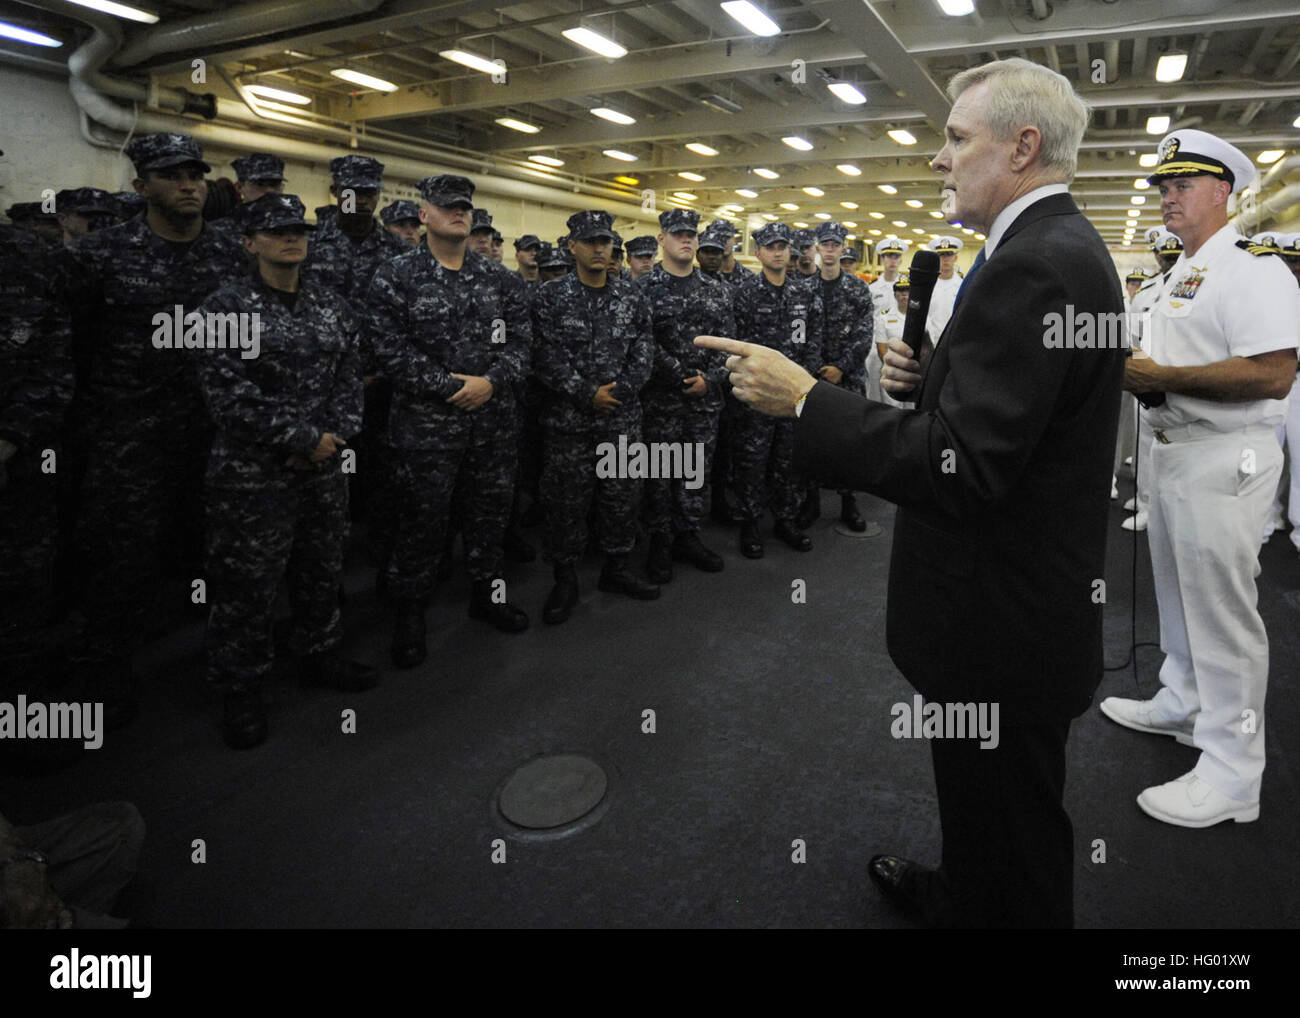 110910-N-ZZ999-003 NEW YORK (Sept. 10, 2011) Secretary of the Navy (SECNAV) the Honorable Ray Mabus addresses the crew of the amphibious transport dock ship USS New York (LPD 21). New York is anchored in the New York harbor and is in the city to commemorate the 10th anniversary of 9/11. (U.S. Navy photo by Chief Mass Communication Specialist Sam Shavers/Released) US Navy 110910-N-ZZ999-003 Secretary of the Navy (SECNAV) the Honorable Ray Mabus addresses the crew of USS New York (LPD 21) Stock Photo